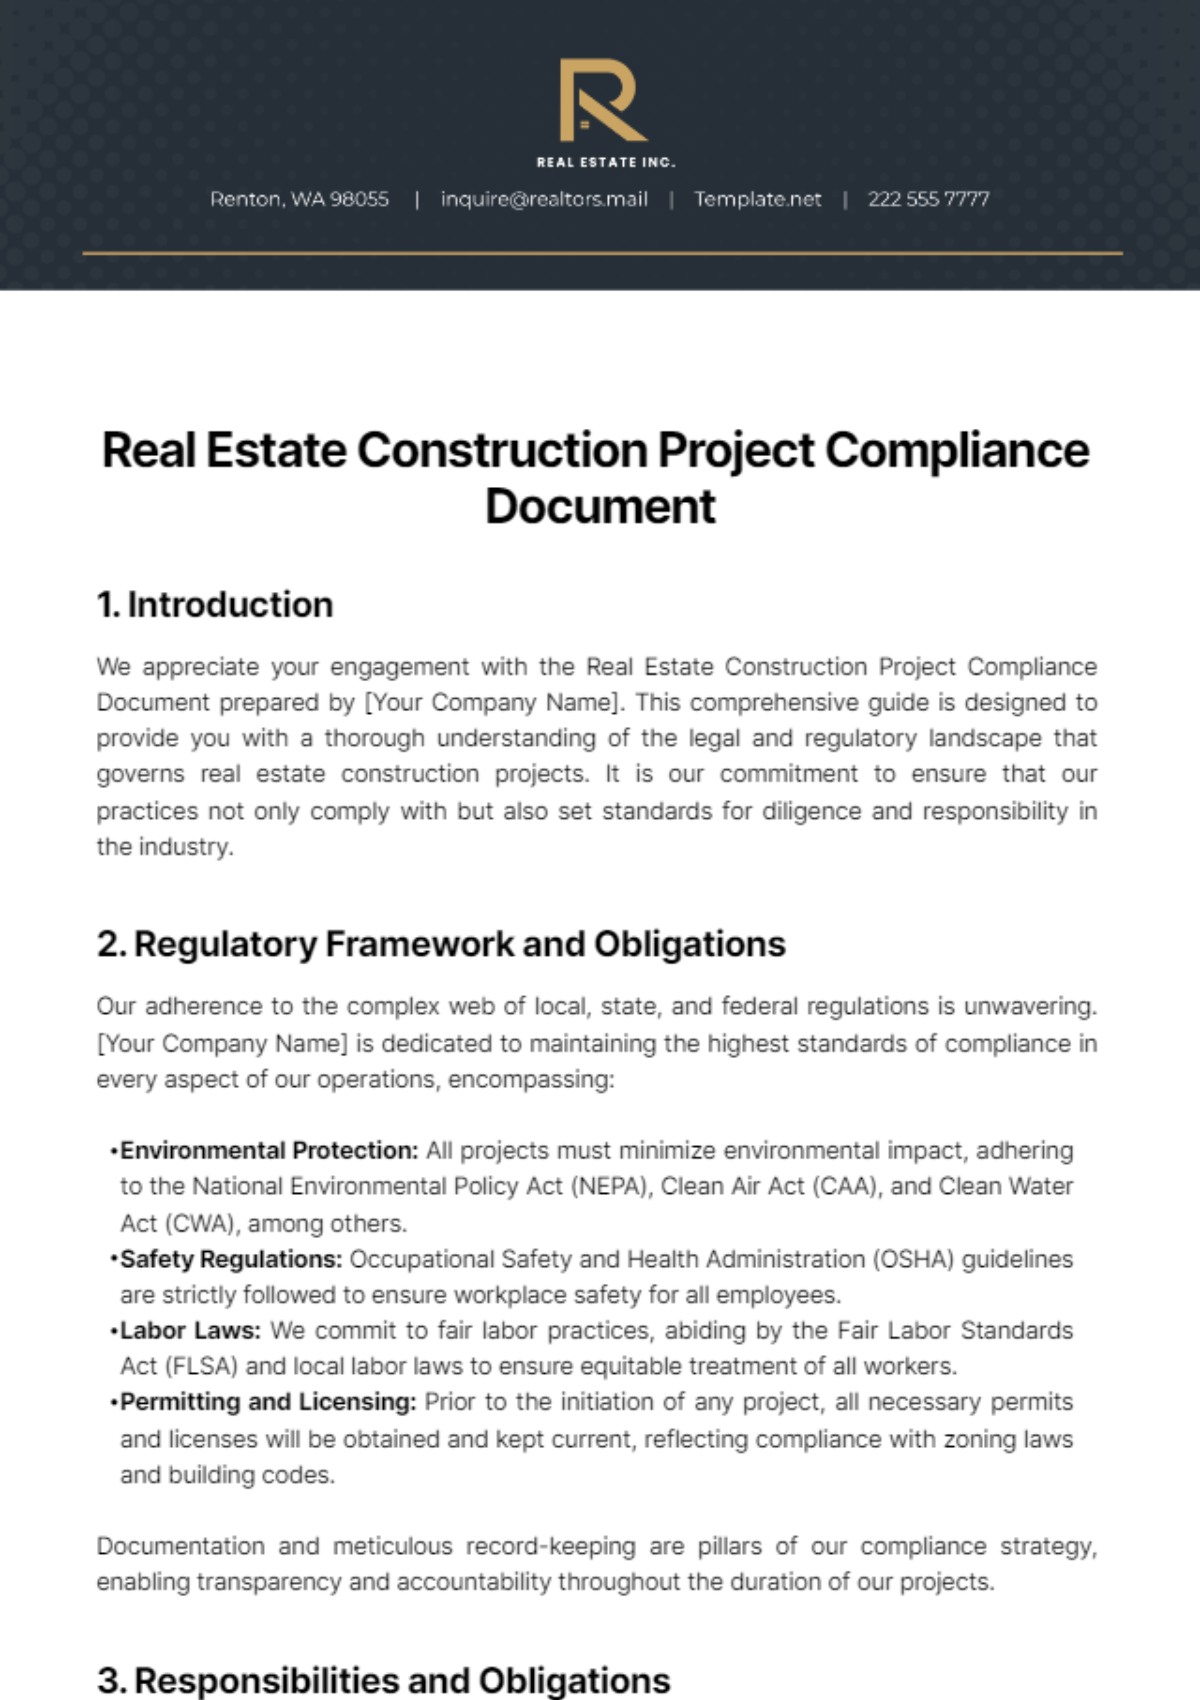 Real Estate Construction Project Compliance Document Template